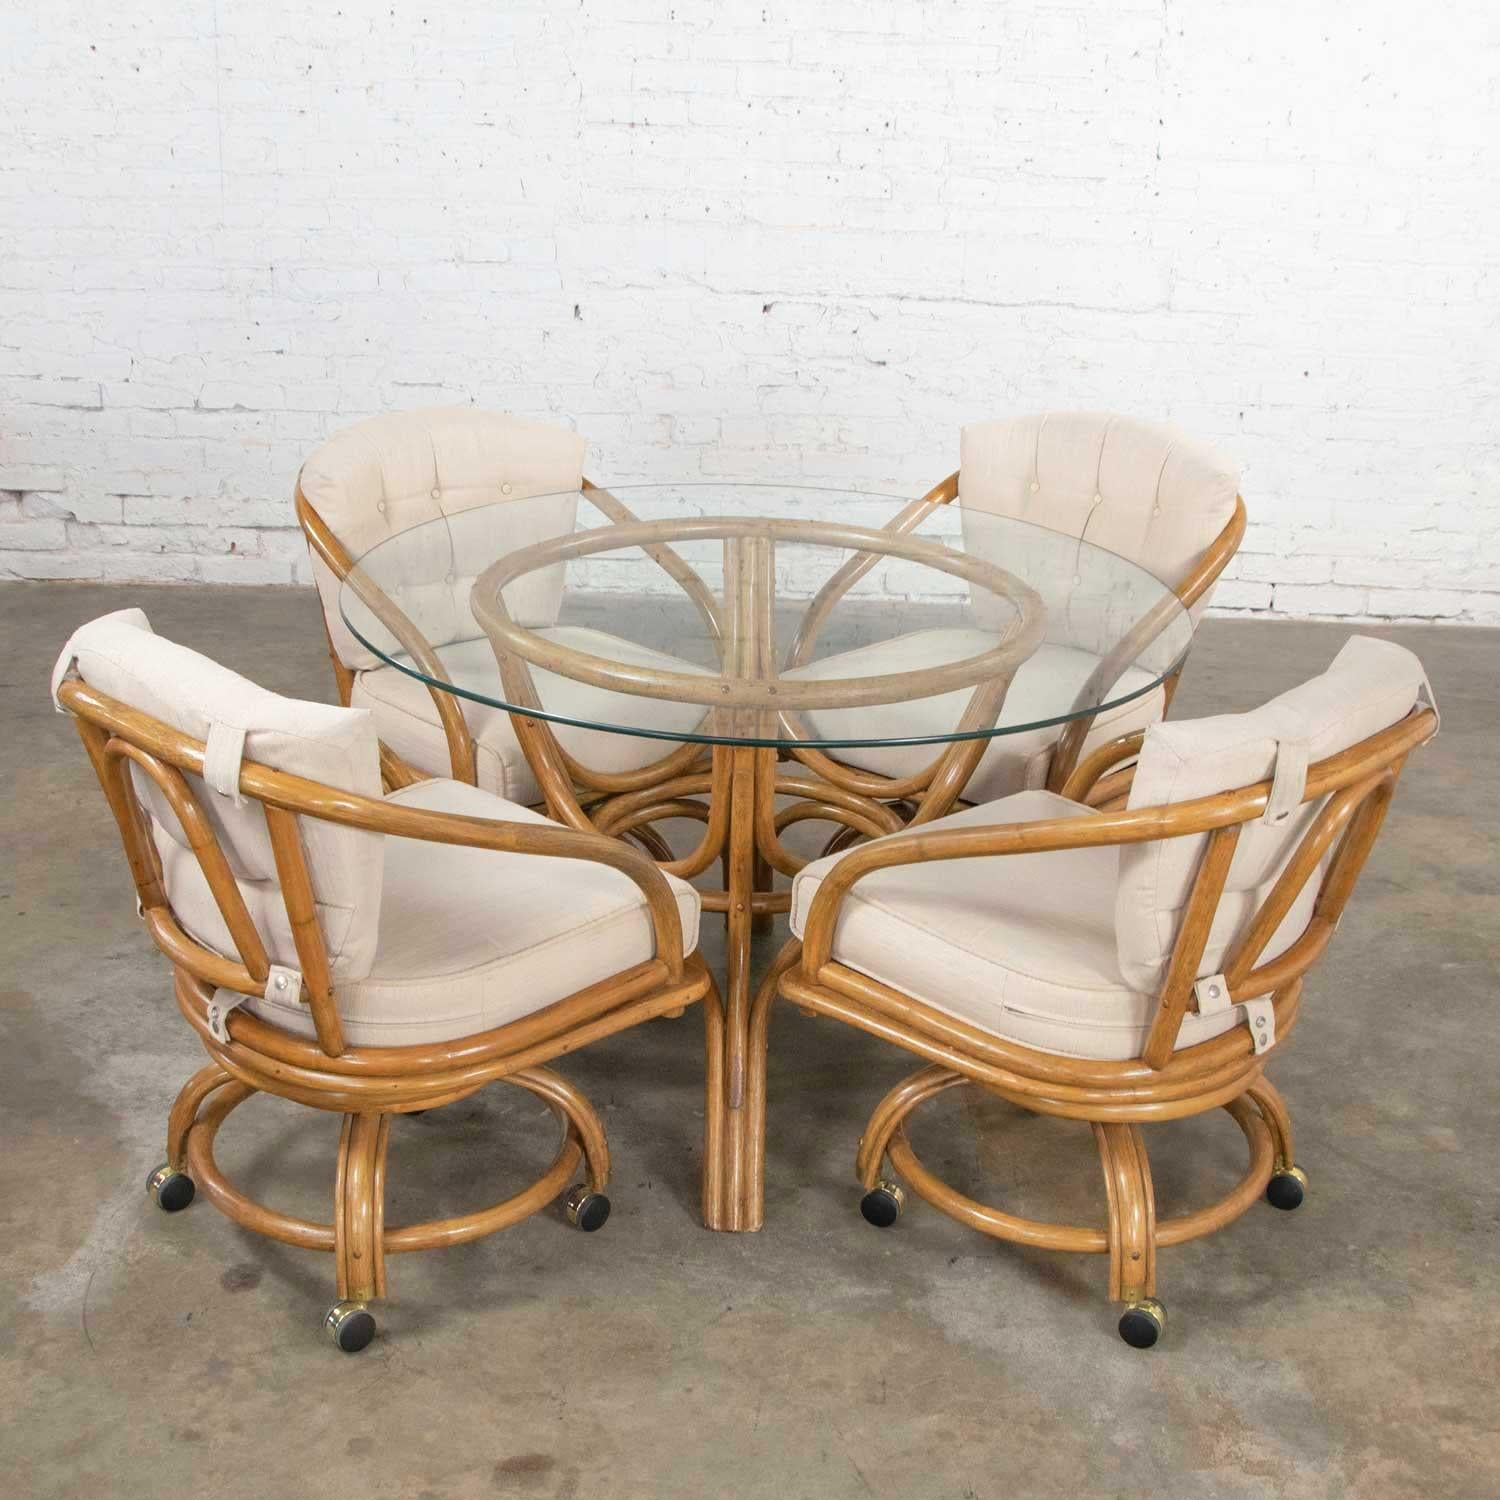 Organic Modern Vintage Rattan Game Table Set Round Glass Top Table and 4 Swivel Rolling Chairs